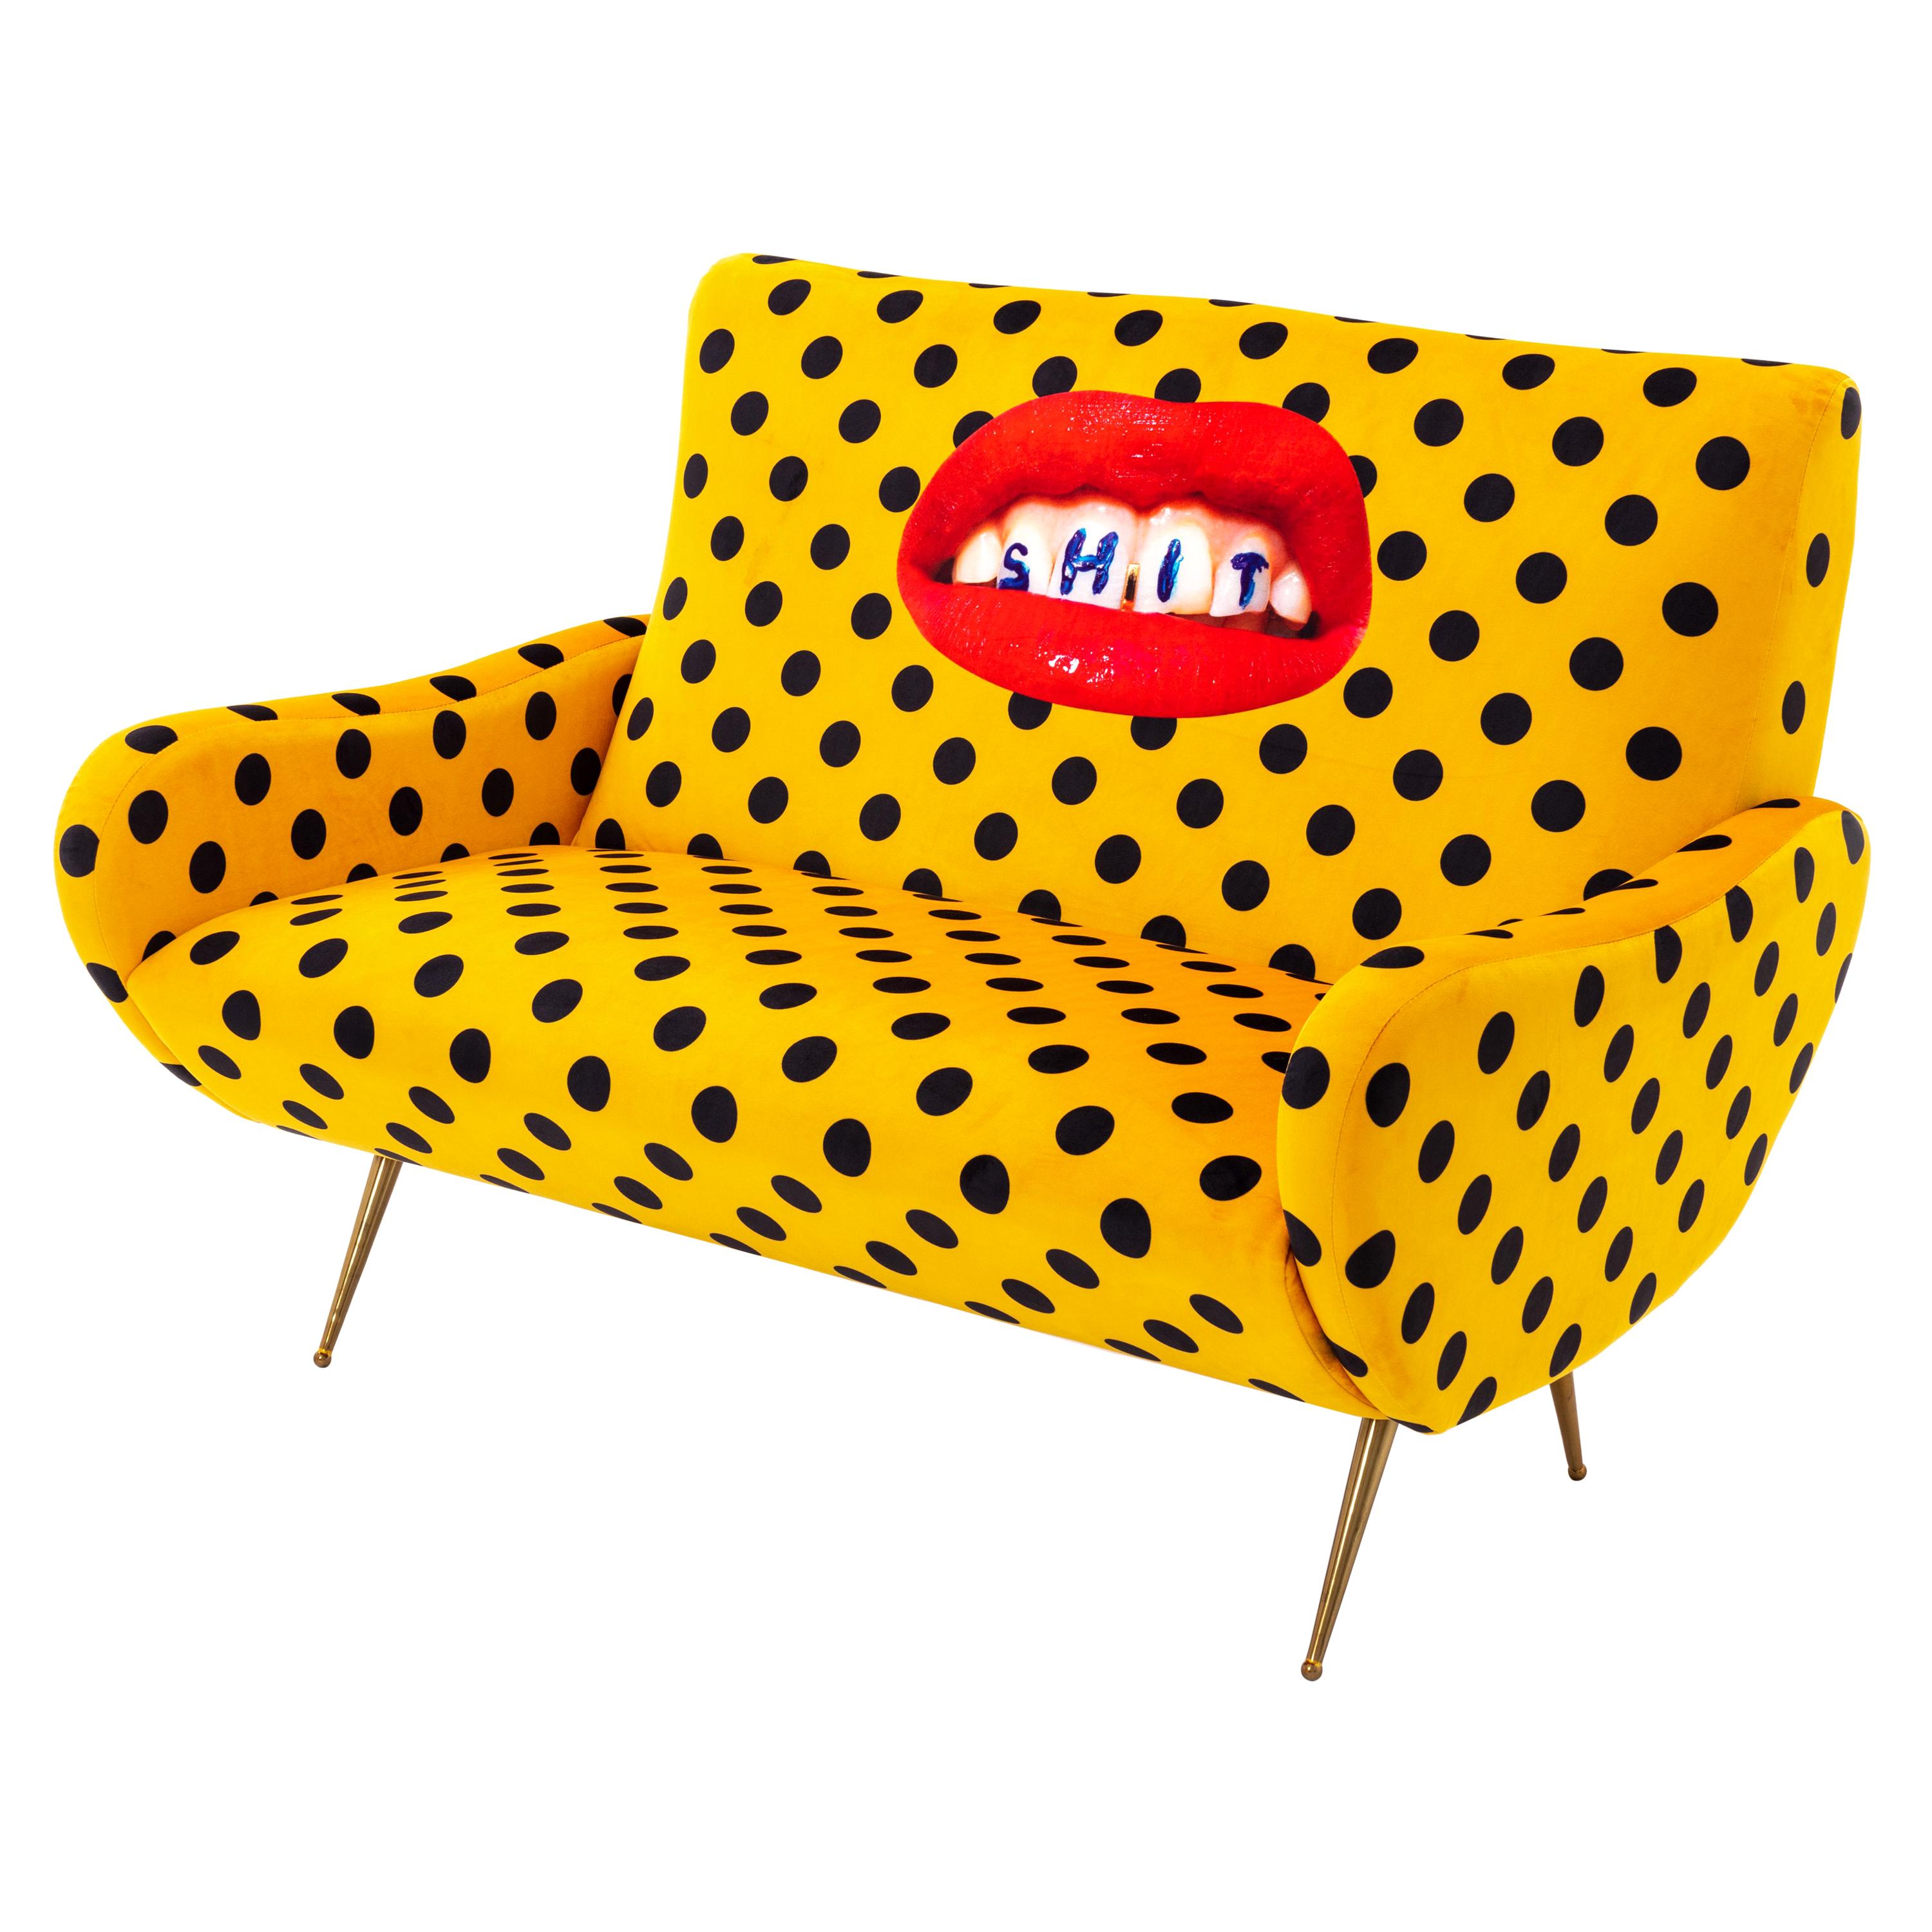 Seletti "Shit" Upholstered Two-Seat Sofa by Toiletpaper For Sale